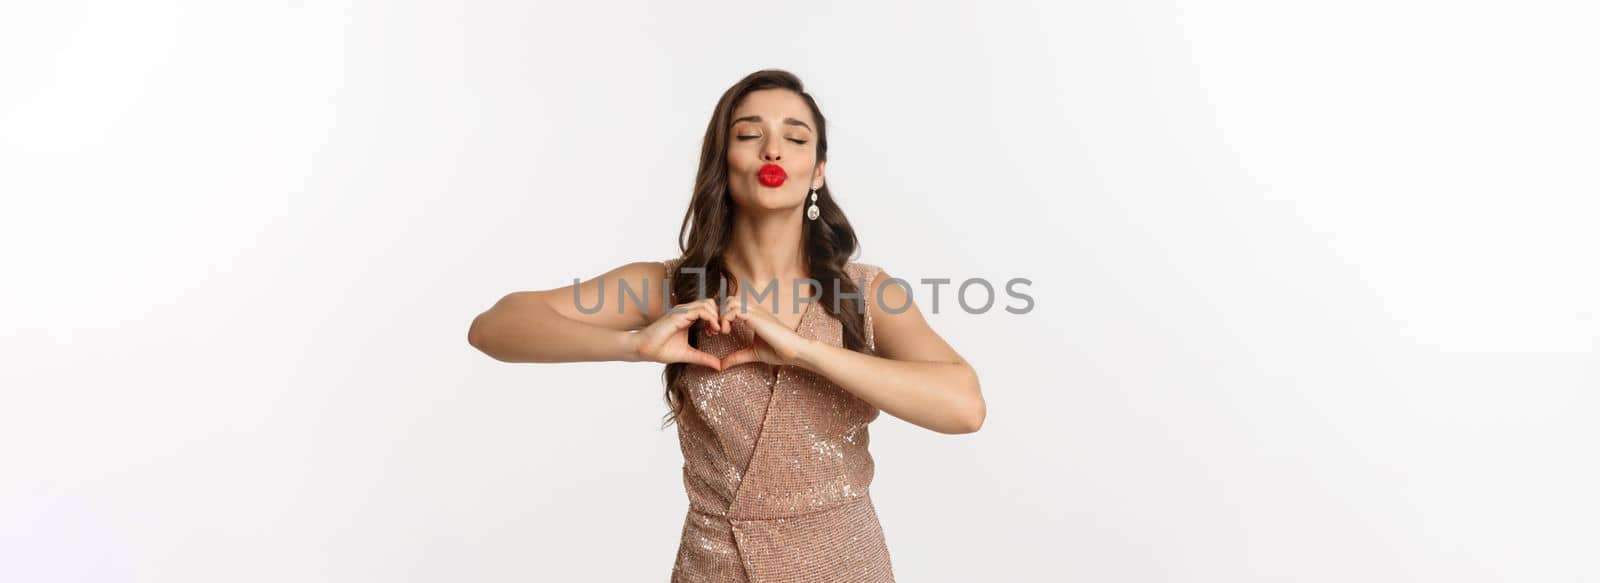 Celebration and party concept. Beautiful young woman in stylish dress, red lips, showing heart sign and waiting for kiss, standing over white background.